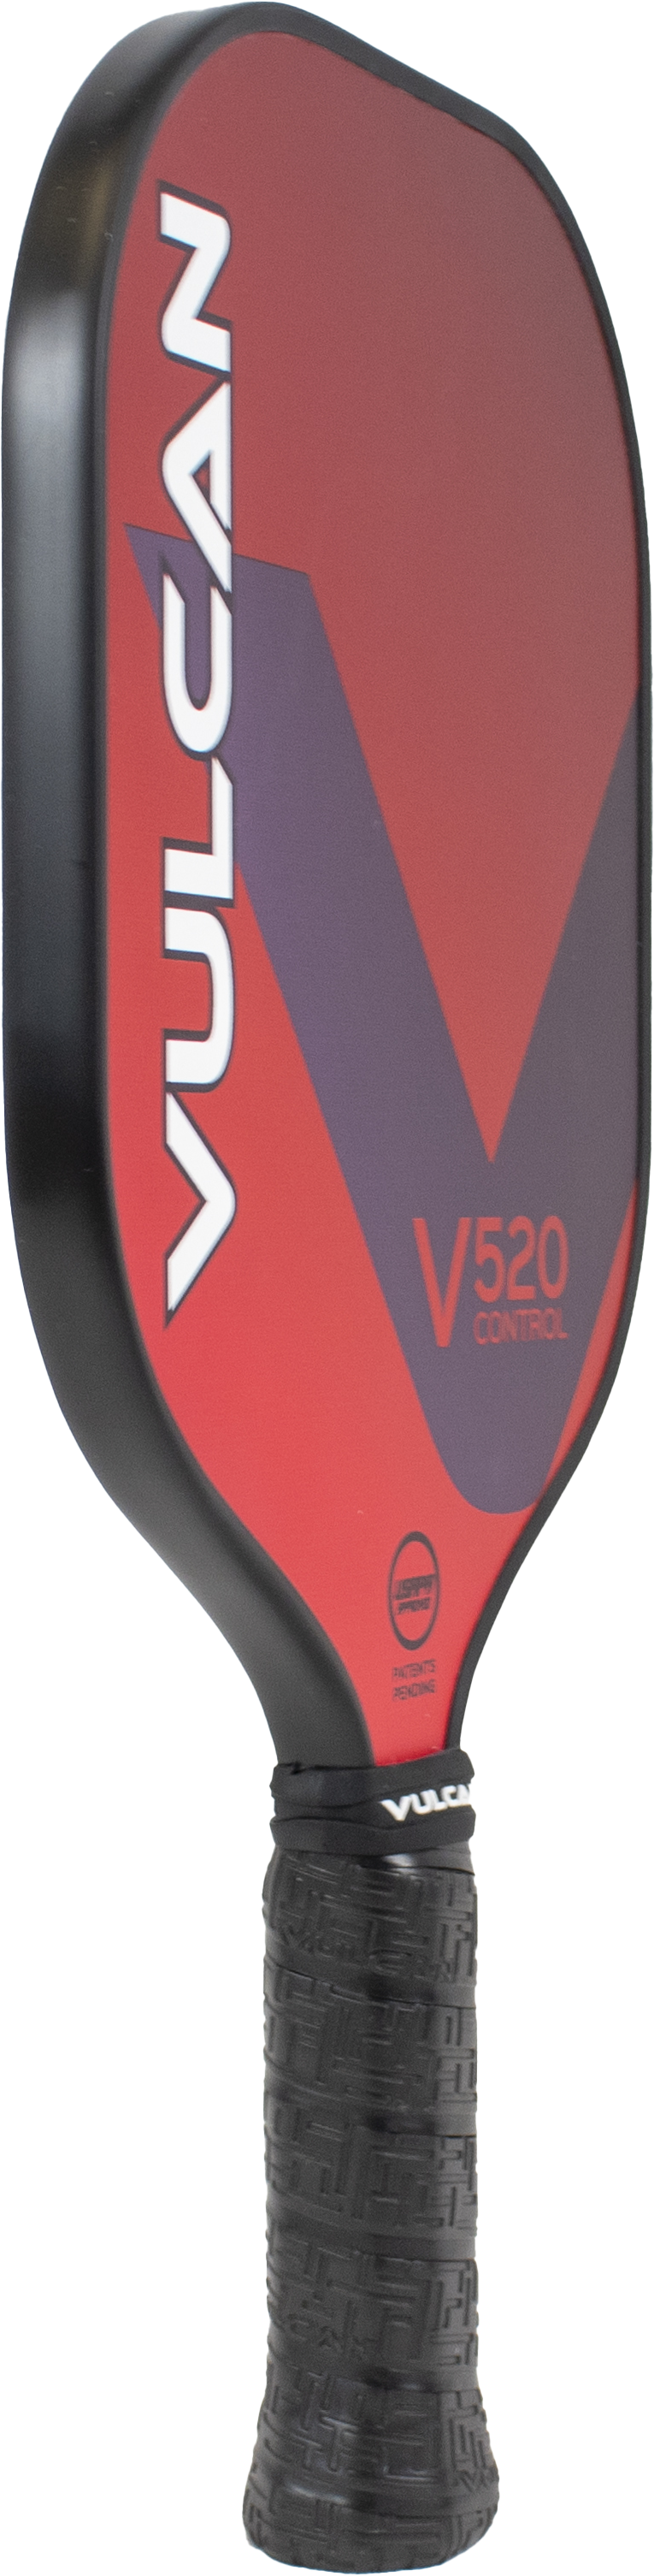 The Vulcan V520 Control Pickleball Paddle is shown on a white background.